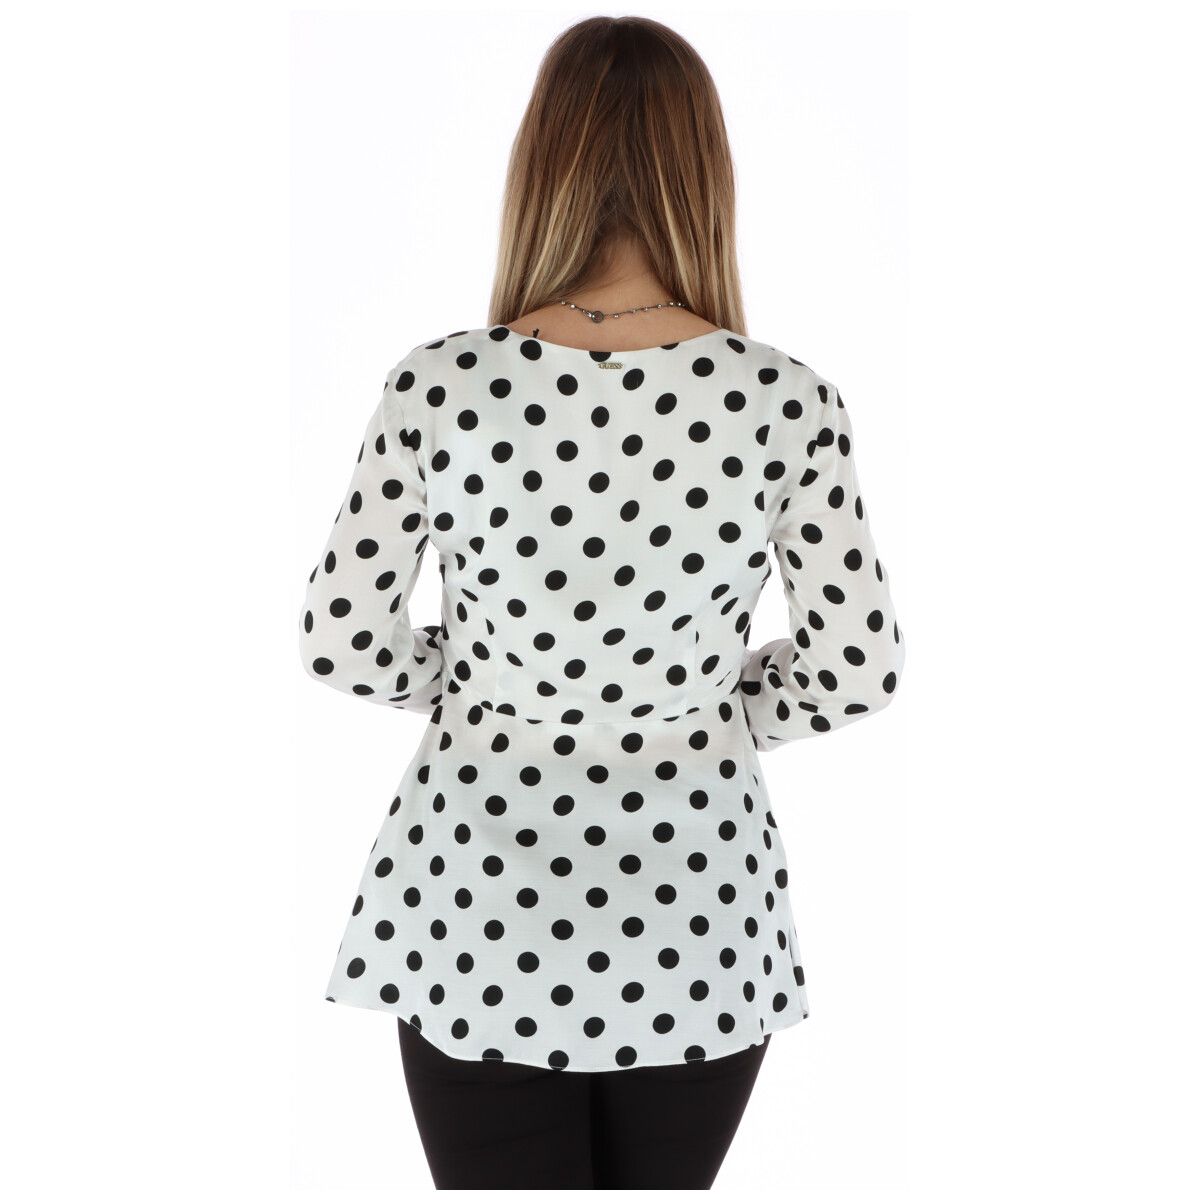 Brand: Guess
Gender: Women
Type: Blouse
Season: Spring/Summer

PRODUCT DETAIL
• Color: white
• Pattern: polka dot
• Sleeves: long
• Neckline: v-neck
•  Article code: W91H69WB4M0

COMPOSITION AND MATERIAL
• Composition: -100% viscose 
•  Washing: handwash